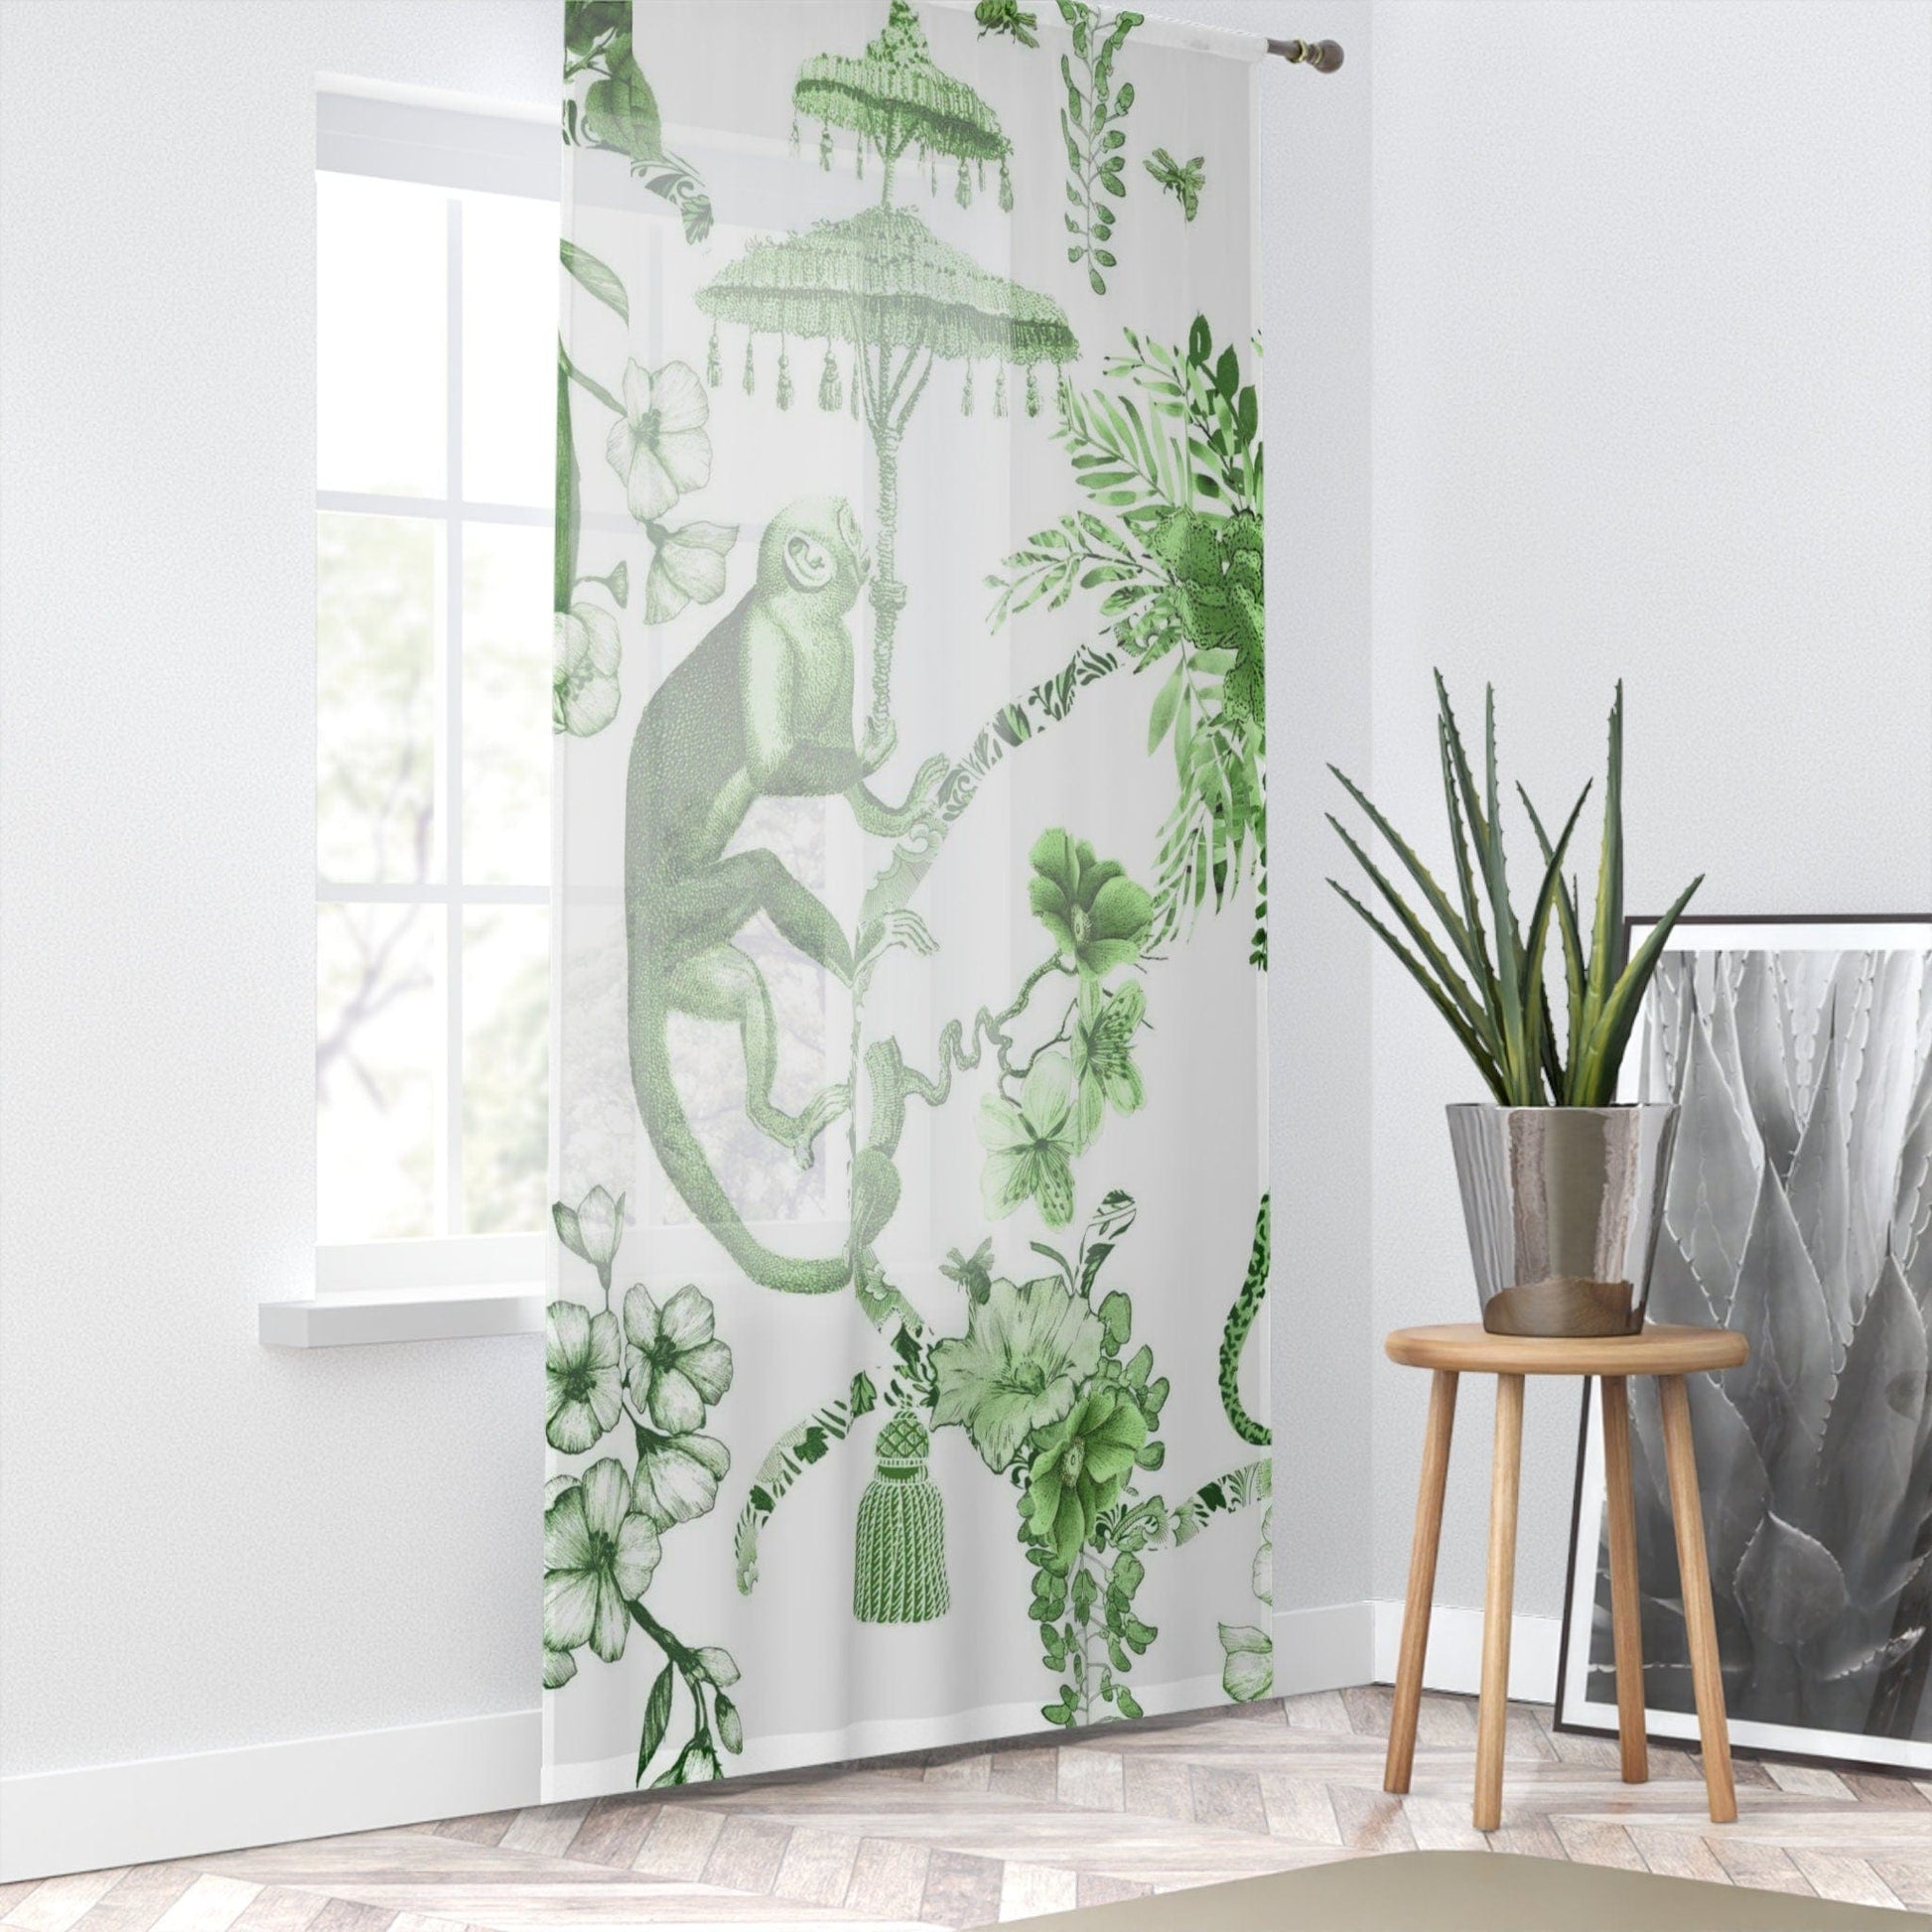 Kate McEnroe New York Chinoiserie Jungle Botanical Toile Window Curtains, Green, White Chinoiserie Floral Curtain Panels, Country Farmhouse Decor - 122481123 Window Curtains